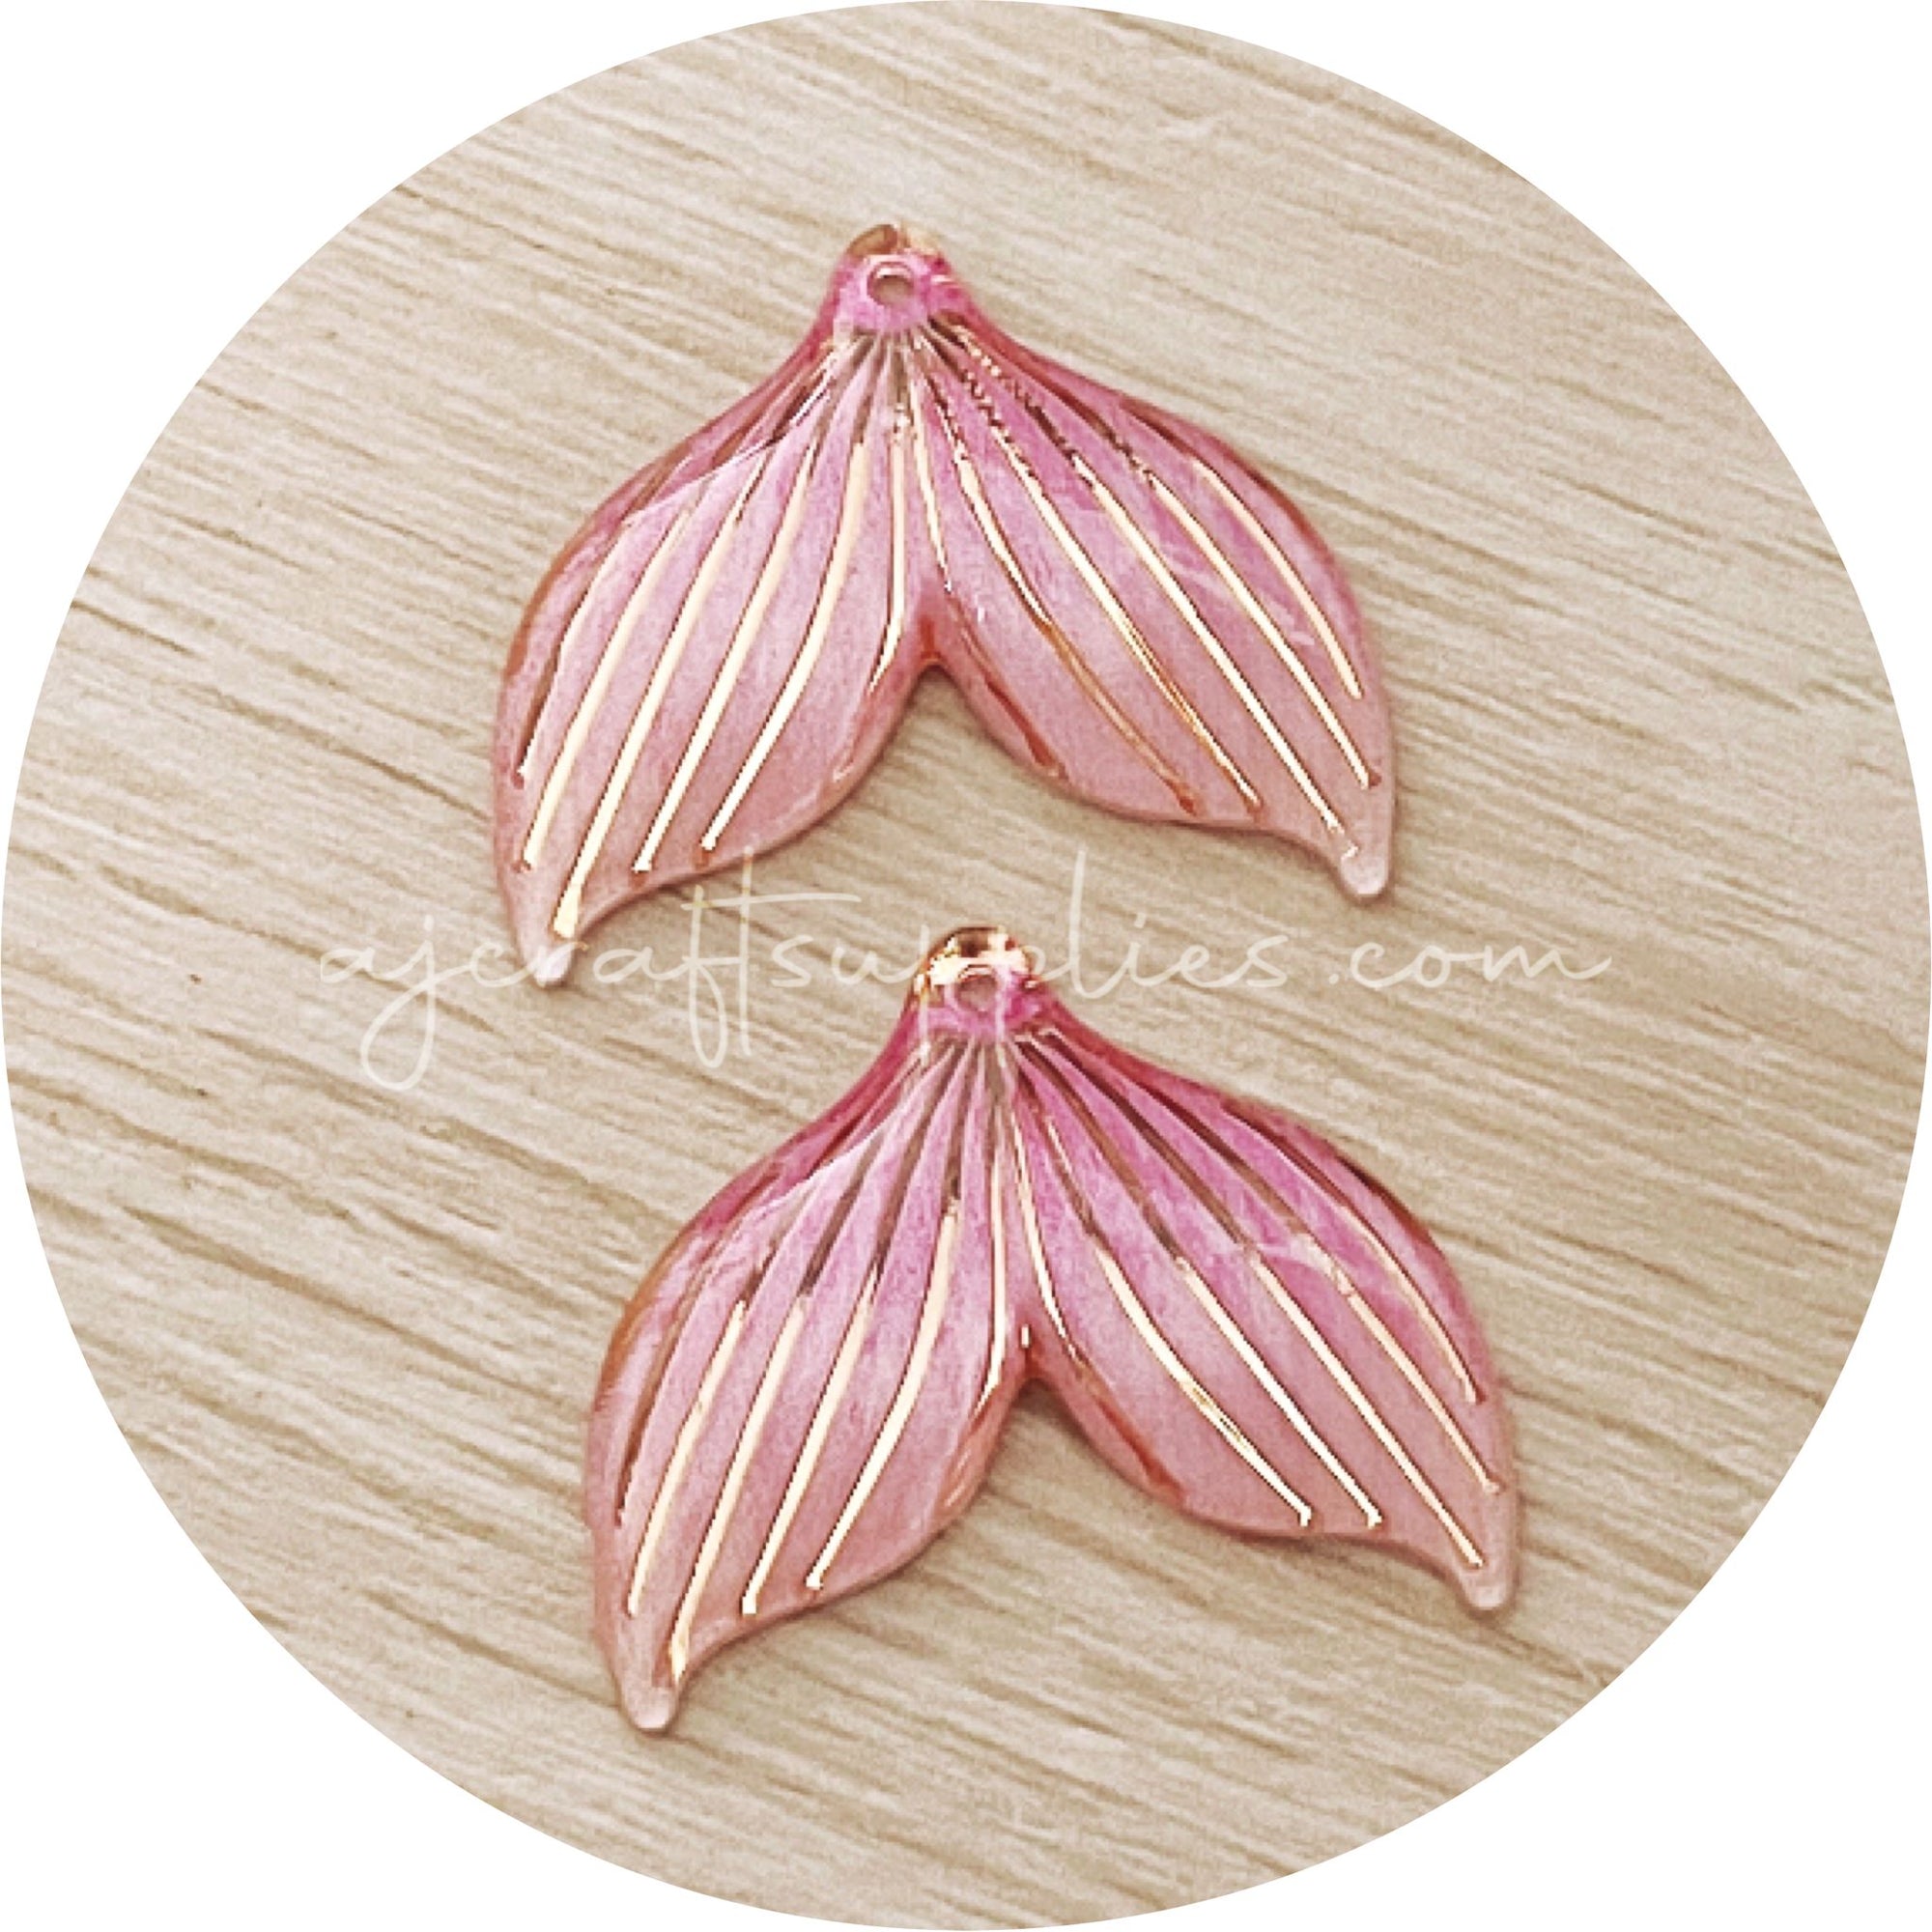 Mermaid Tail Acrylic Charms - Pink / Gold - Each